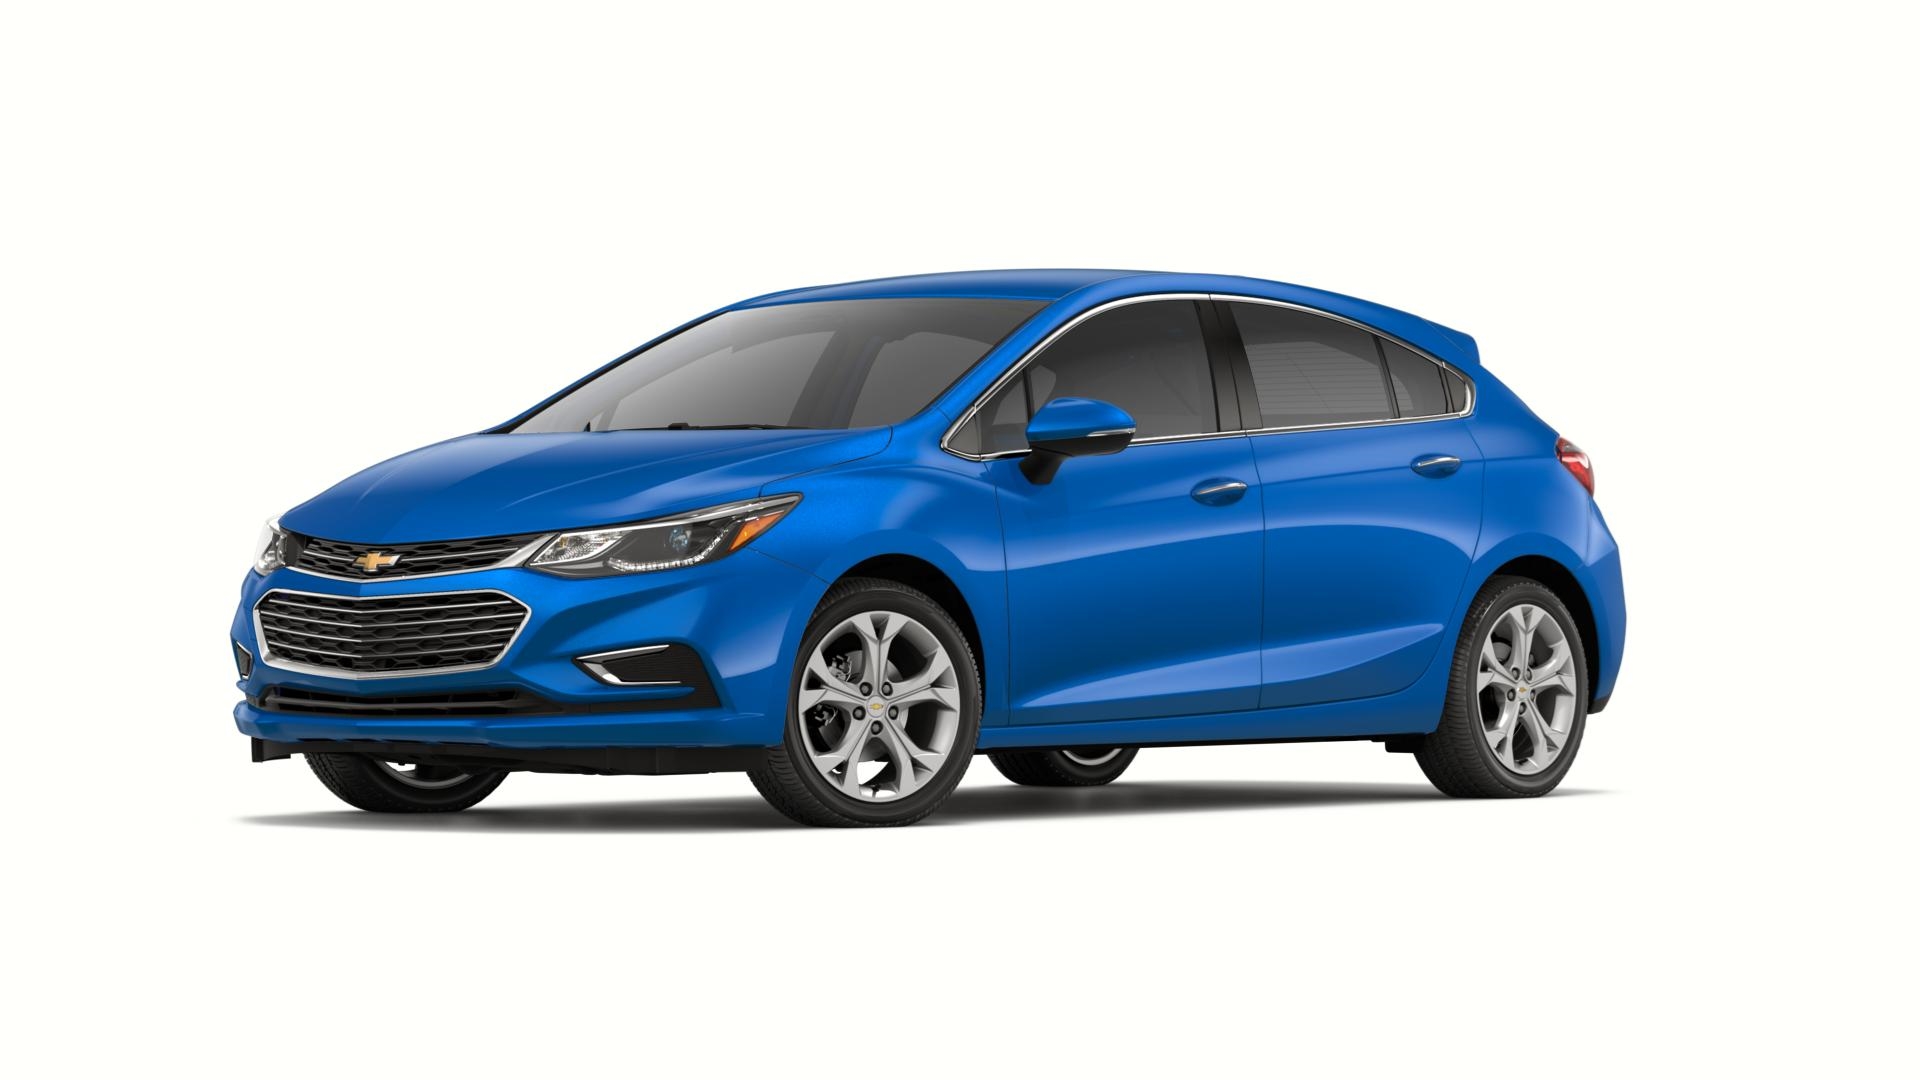 2017 Chevrolet Cruze LT Hatchback Full Specs, Features and Price | CarBuzz Tire Size For 2017 Chevy Cruze Hatchback